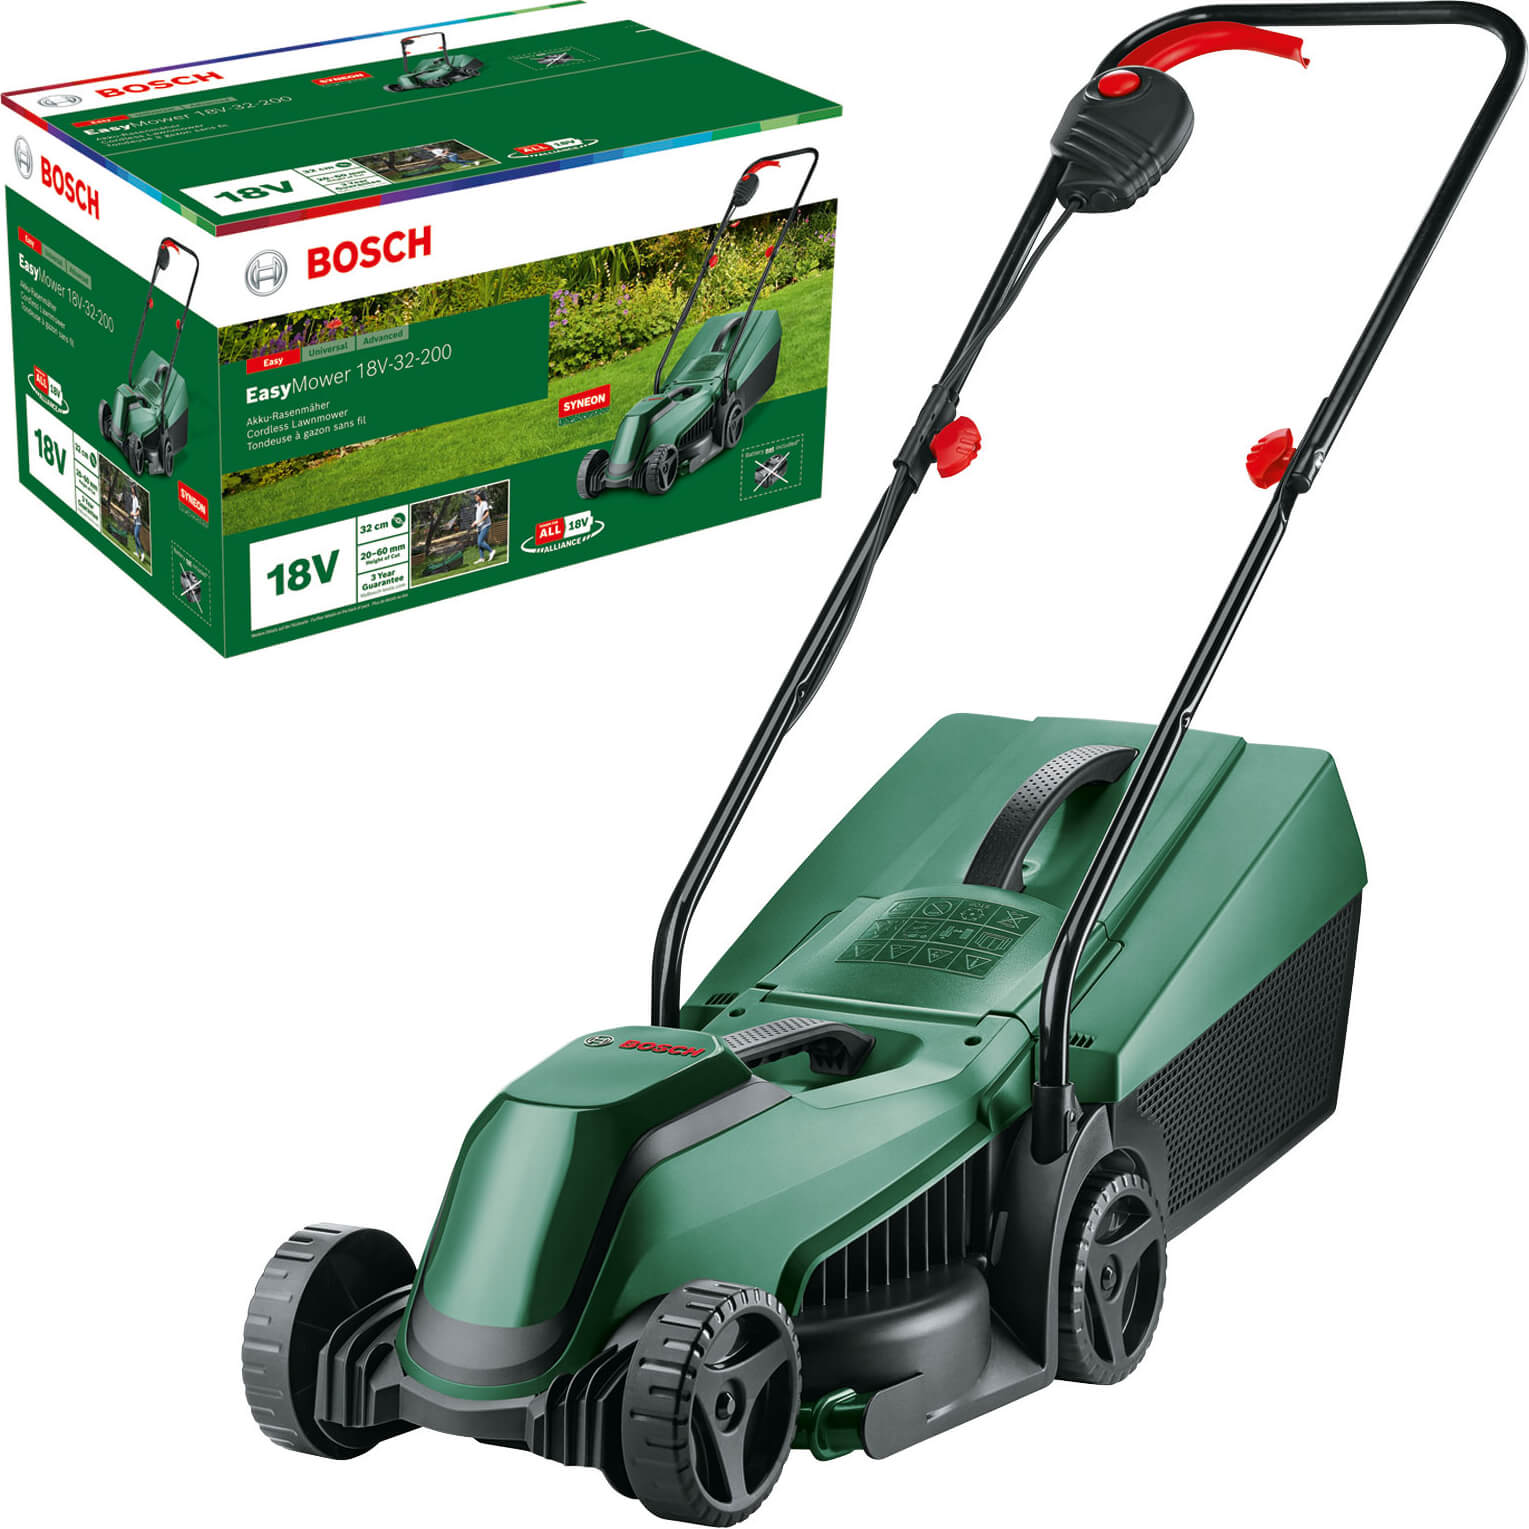 Image of Bosch EASYMOWER 18V-32-200 18v Cordless Rotary Lawnmower 320mm No Batteries No Charger